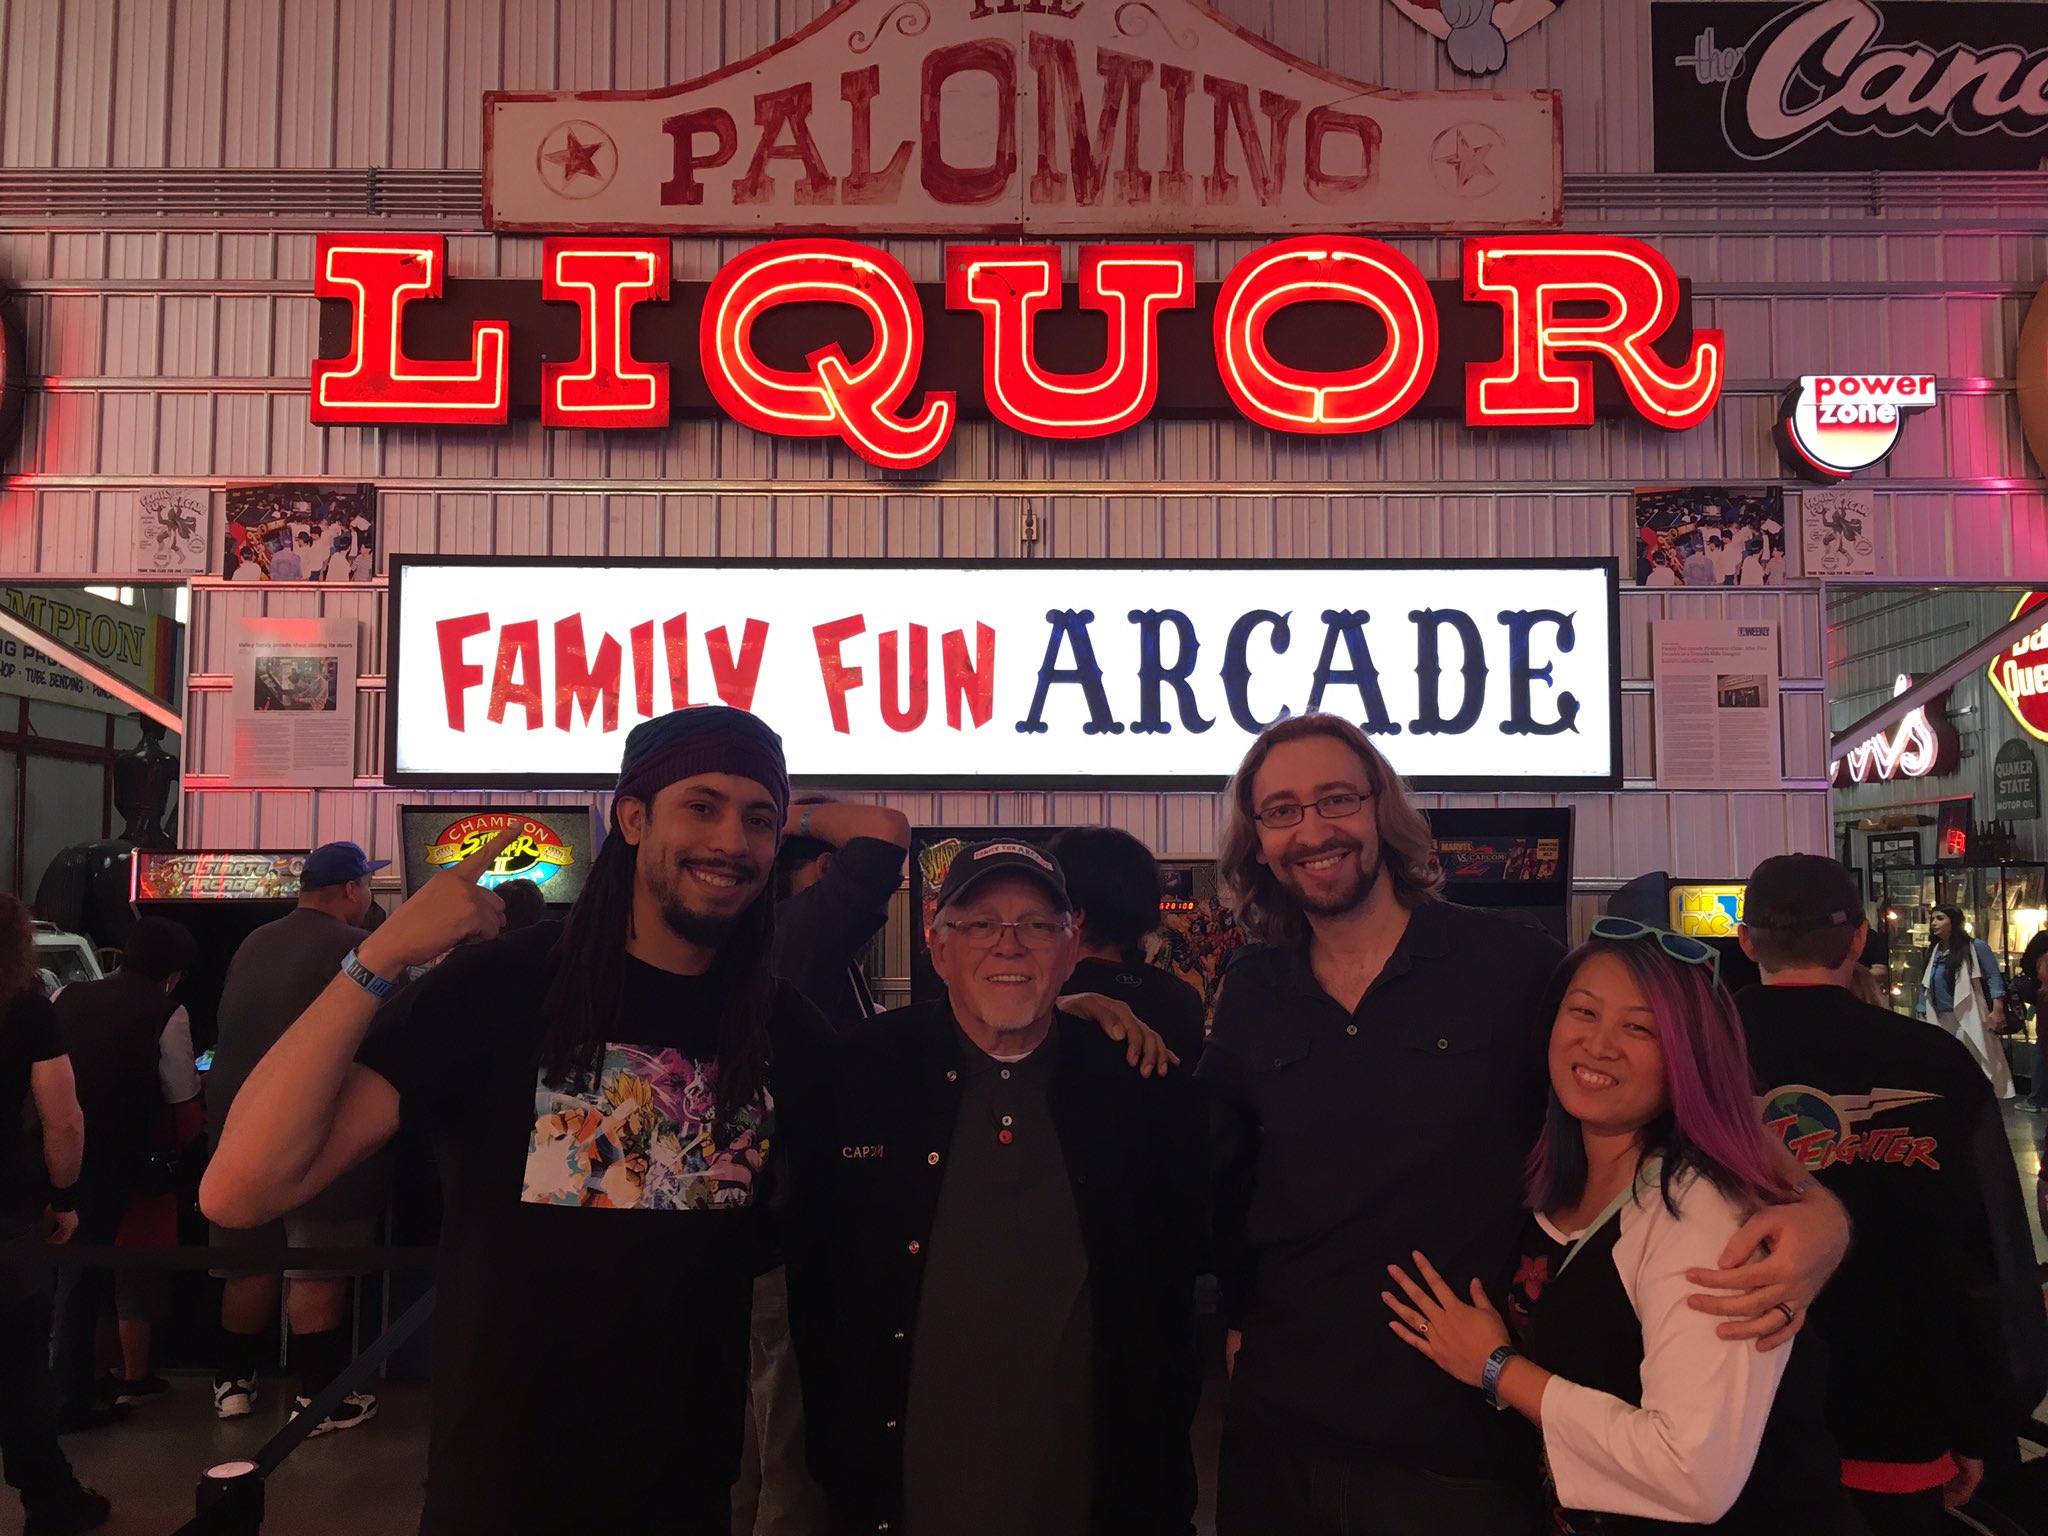 Maximilian Dood On Twitter Today Was A Good One The Greatest Arcade For 40 Years If Anyone Remembers Ffa Check Em Out Familyfunarcade Https T Co 1unk1qlte5 Twitter